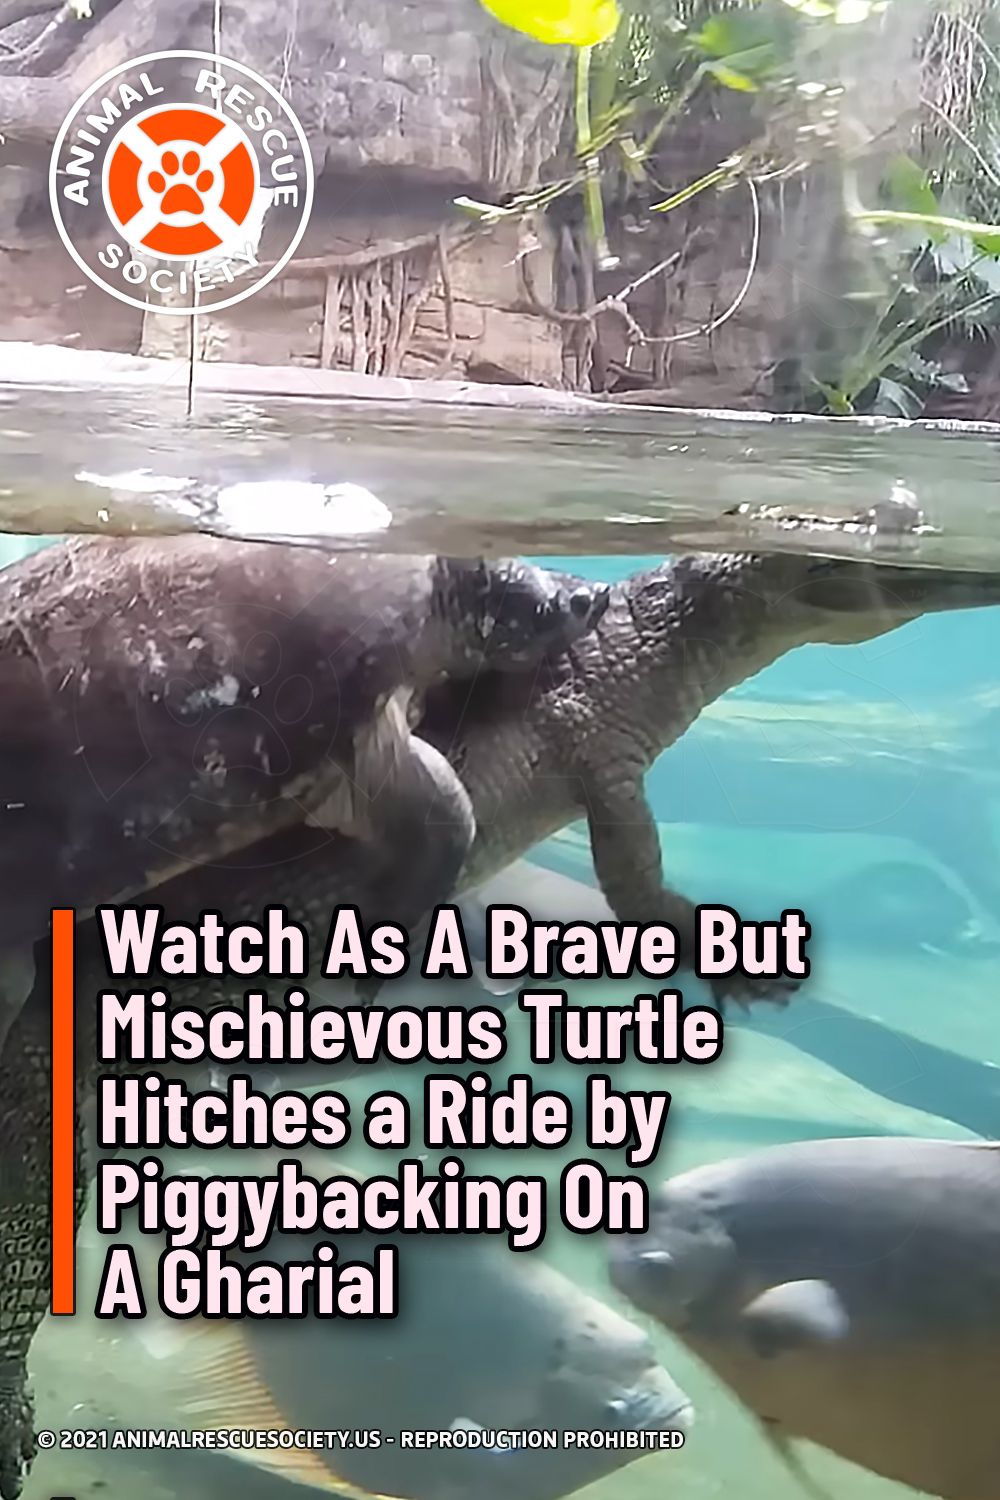 Watch As A Brave But Mischievous Turtle Hitches a Ride by Piggybacking On A Gharial